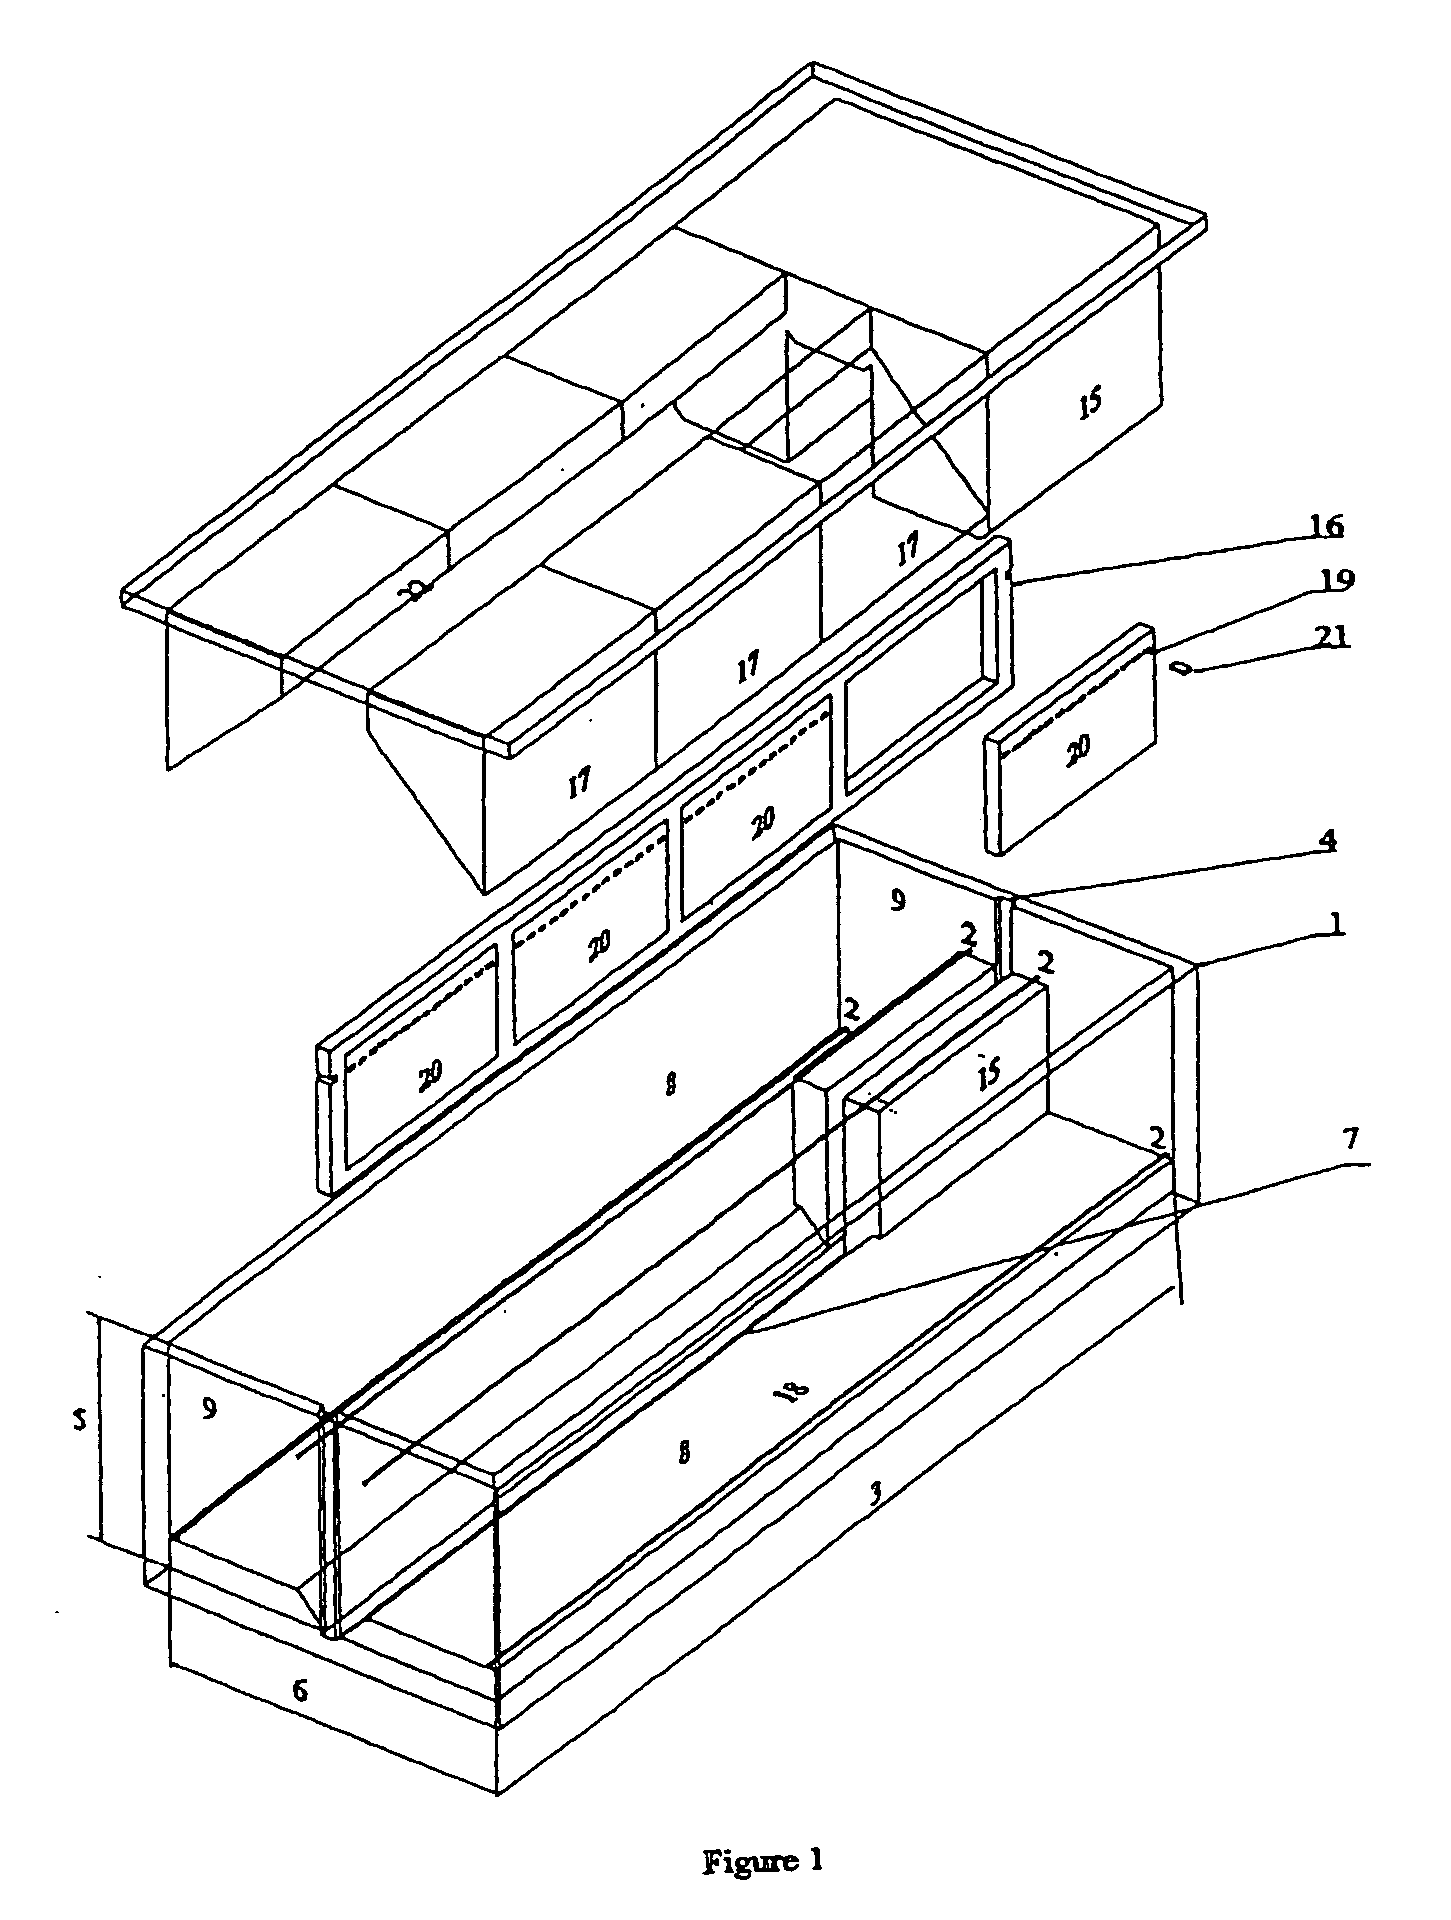 Pulsed Field Gel Electrophoresis chambers, accessories and methods of use for the separation of DNA molecules